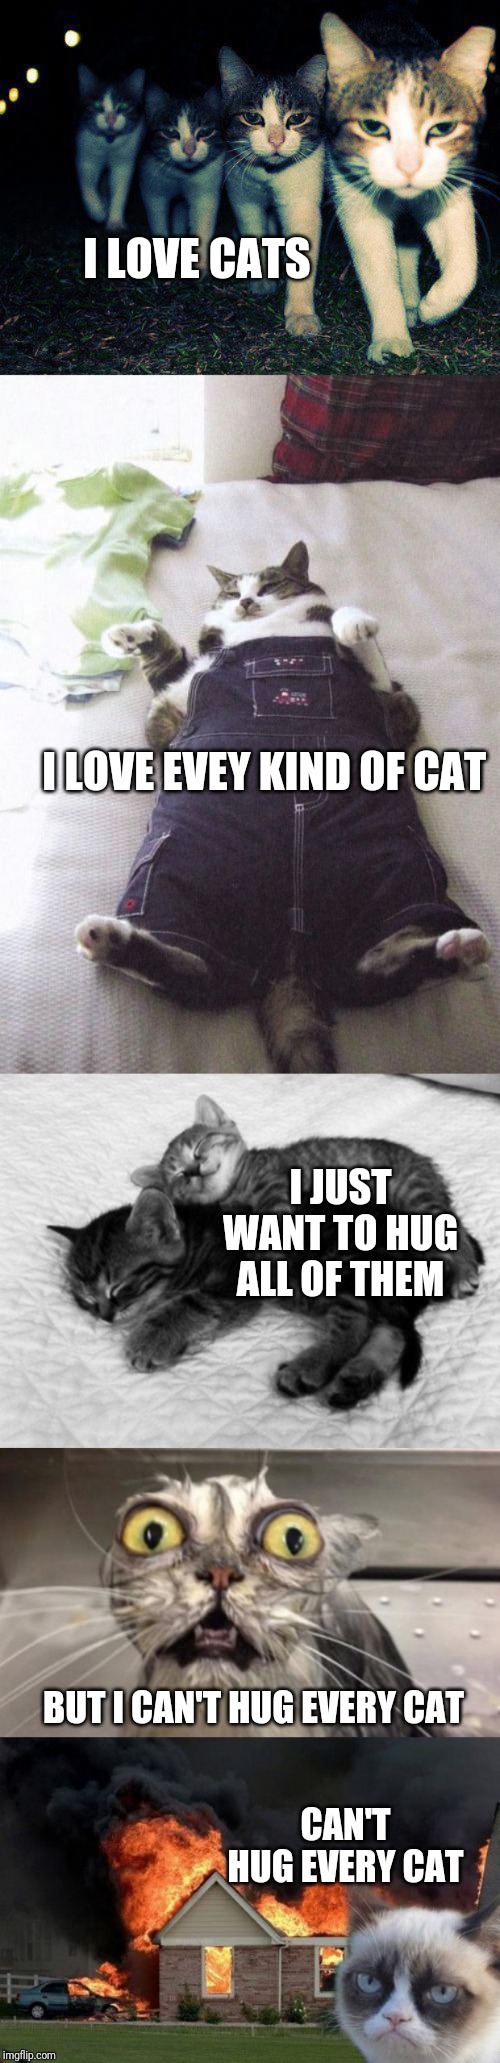 Can't hug every cat | I LOVE CATS; I LOVE EVEY KIND OF CAT; I JUST WANT TO HUG ALL OF THEM; BUT I CAN'T HUG EVERY CAT; CAN'T HUG EVERY CAT | image tagged in memes,fat cat,wrong neighboorhood cats,burn kitty,crazy cat,cuddle cats | made w/ Imgflip meme maker